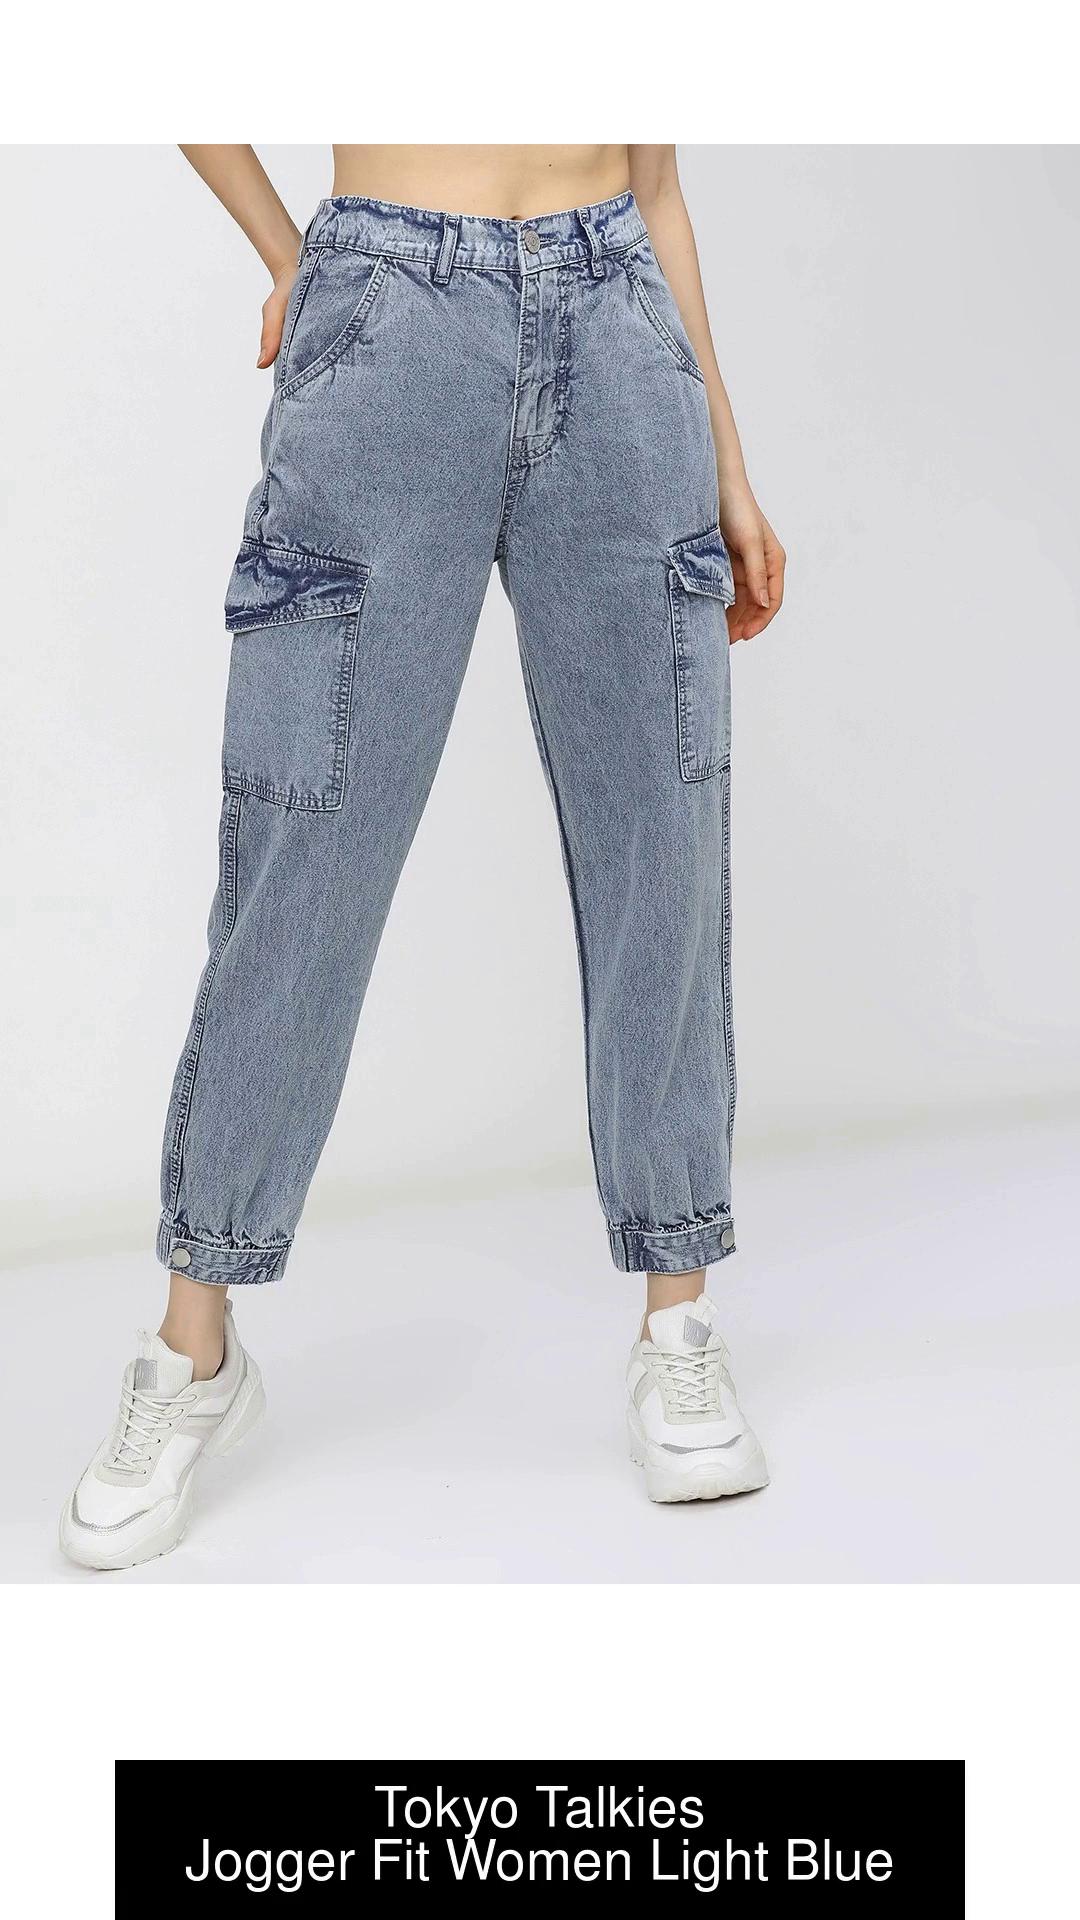 Tokyo Talkies Jogger Fit Women Light Blue Jeans - Buy Tokyo Talkies Jogger  Fit Women Light Blue Jeans Online at Best Prices in India